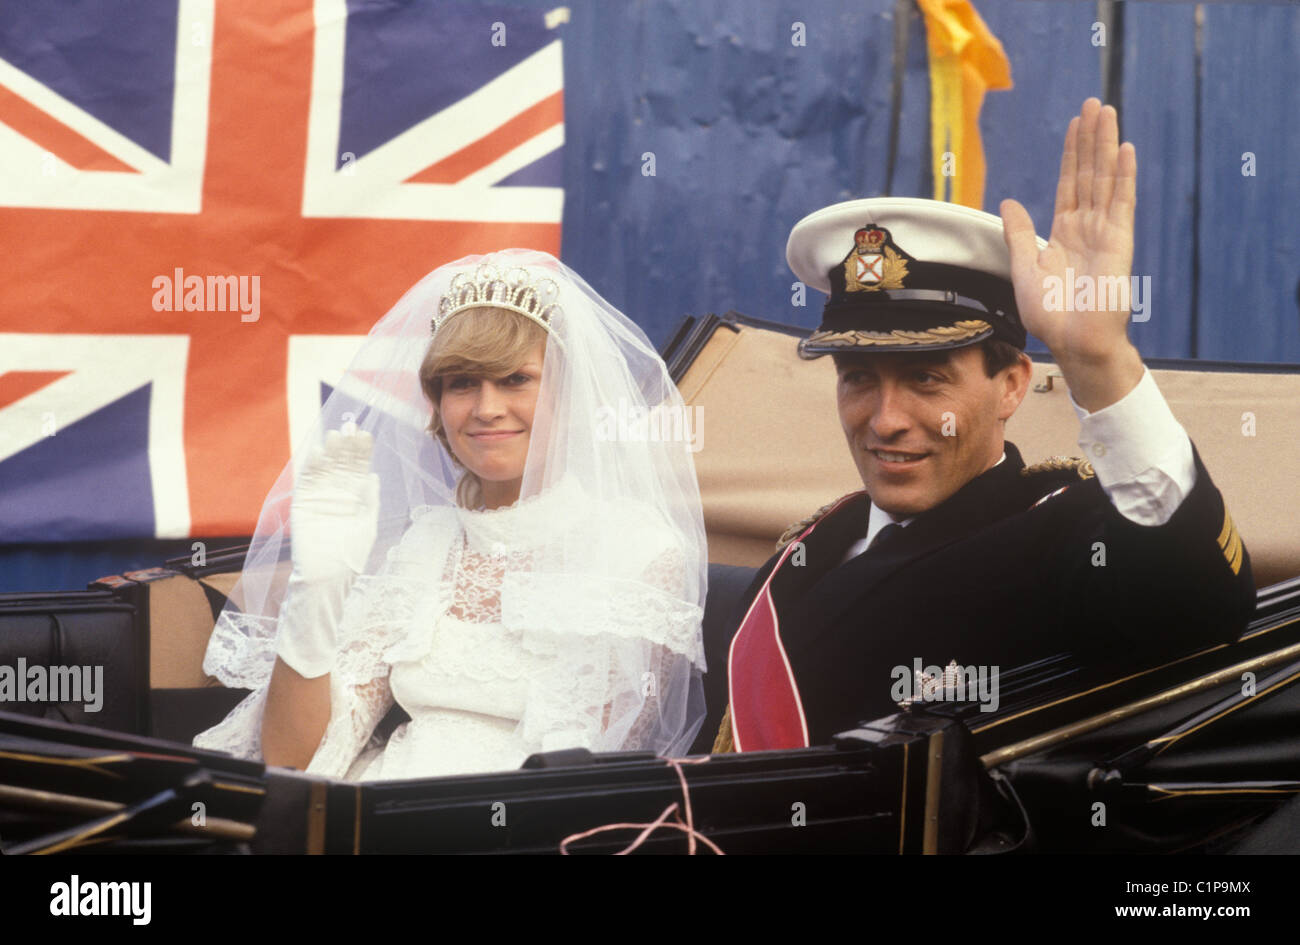 Royal lookalikes, celebrity doppelgänger of Prince Charles and Lady Diana Spencer on their royal wedding day. London 29th July 1981 1980s UK HOMER SYKES Stock Photo